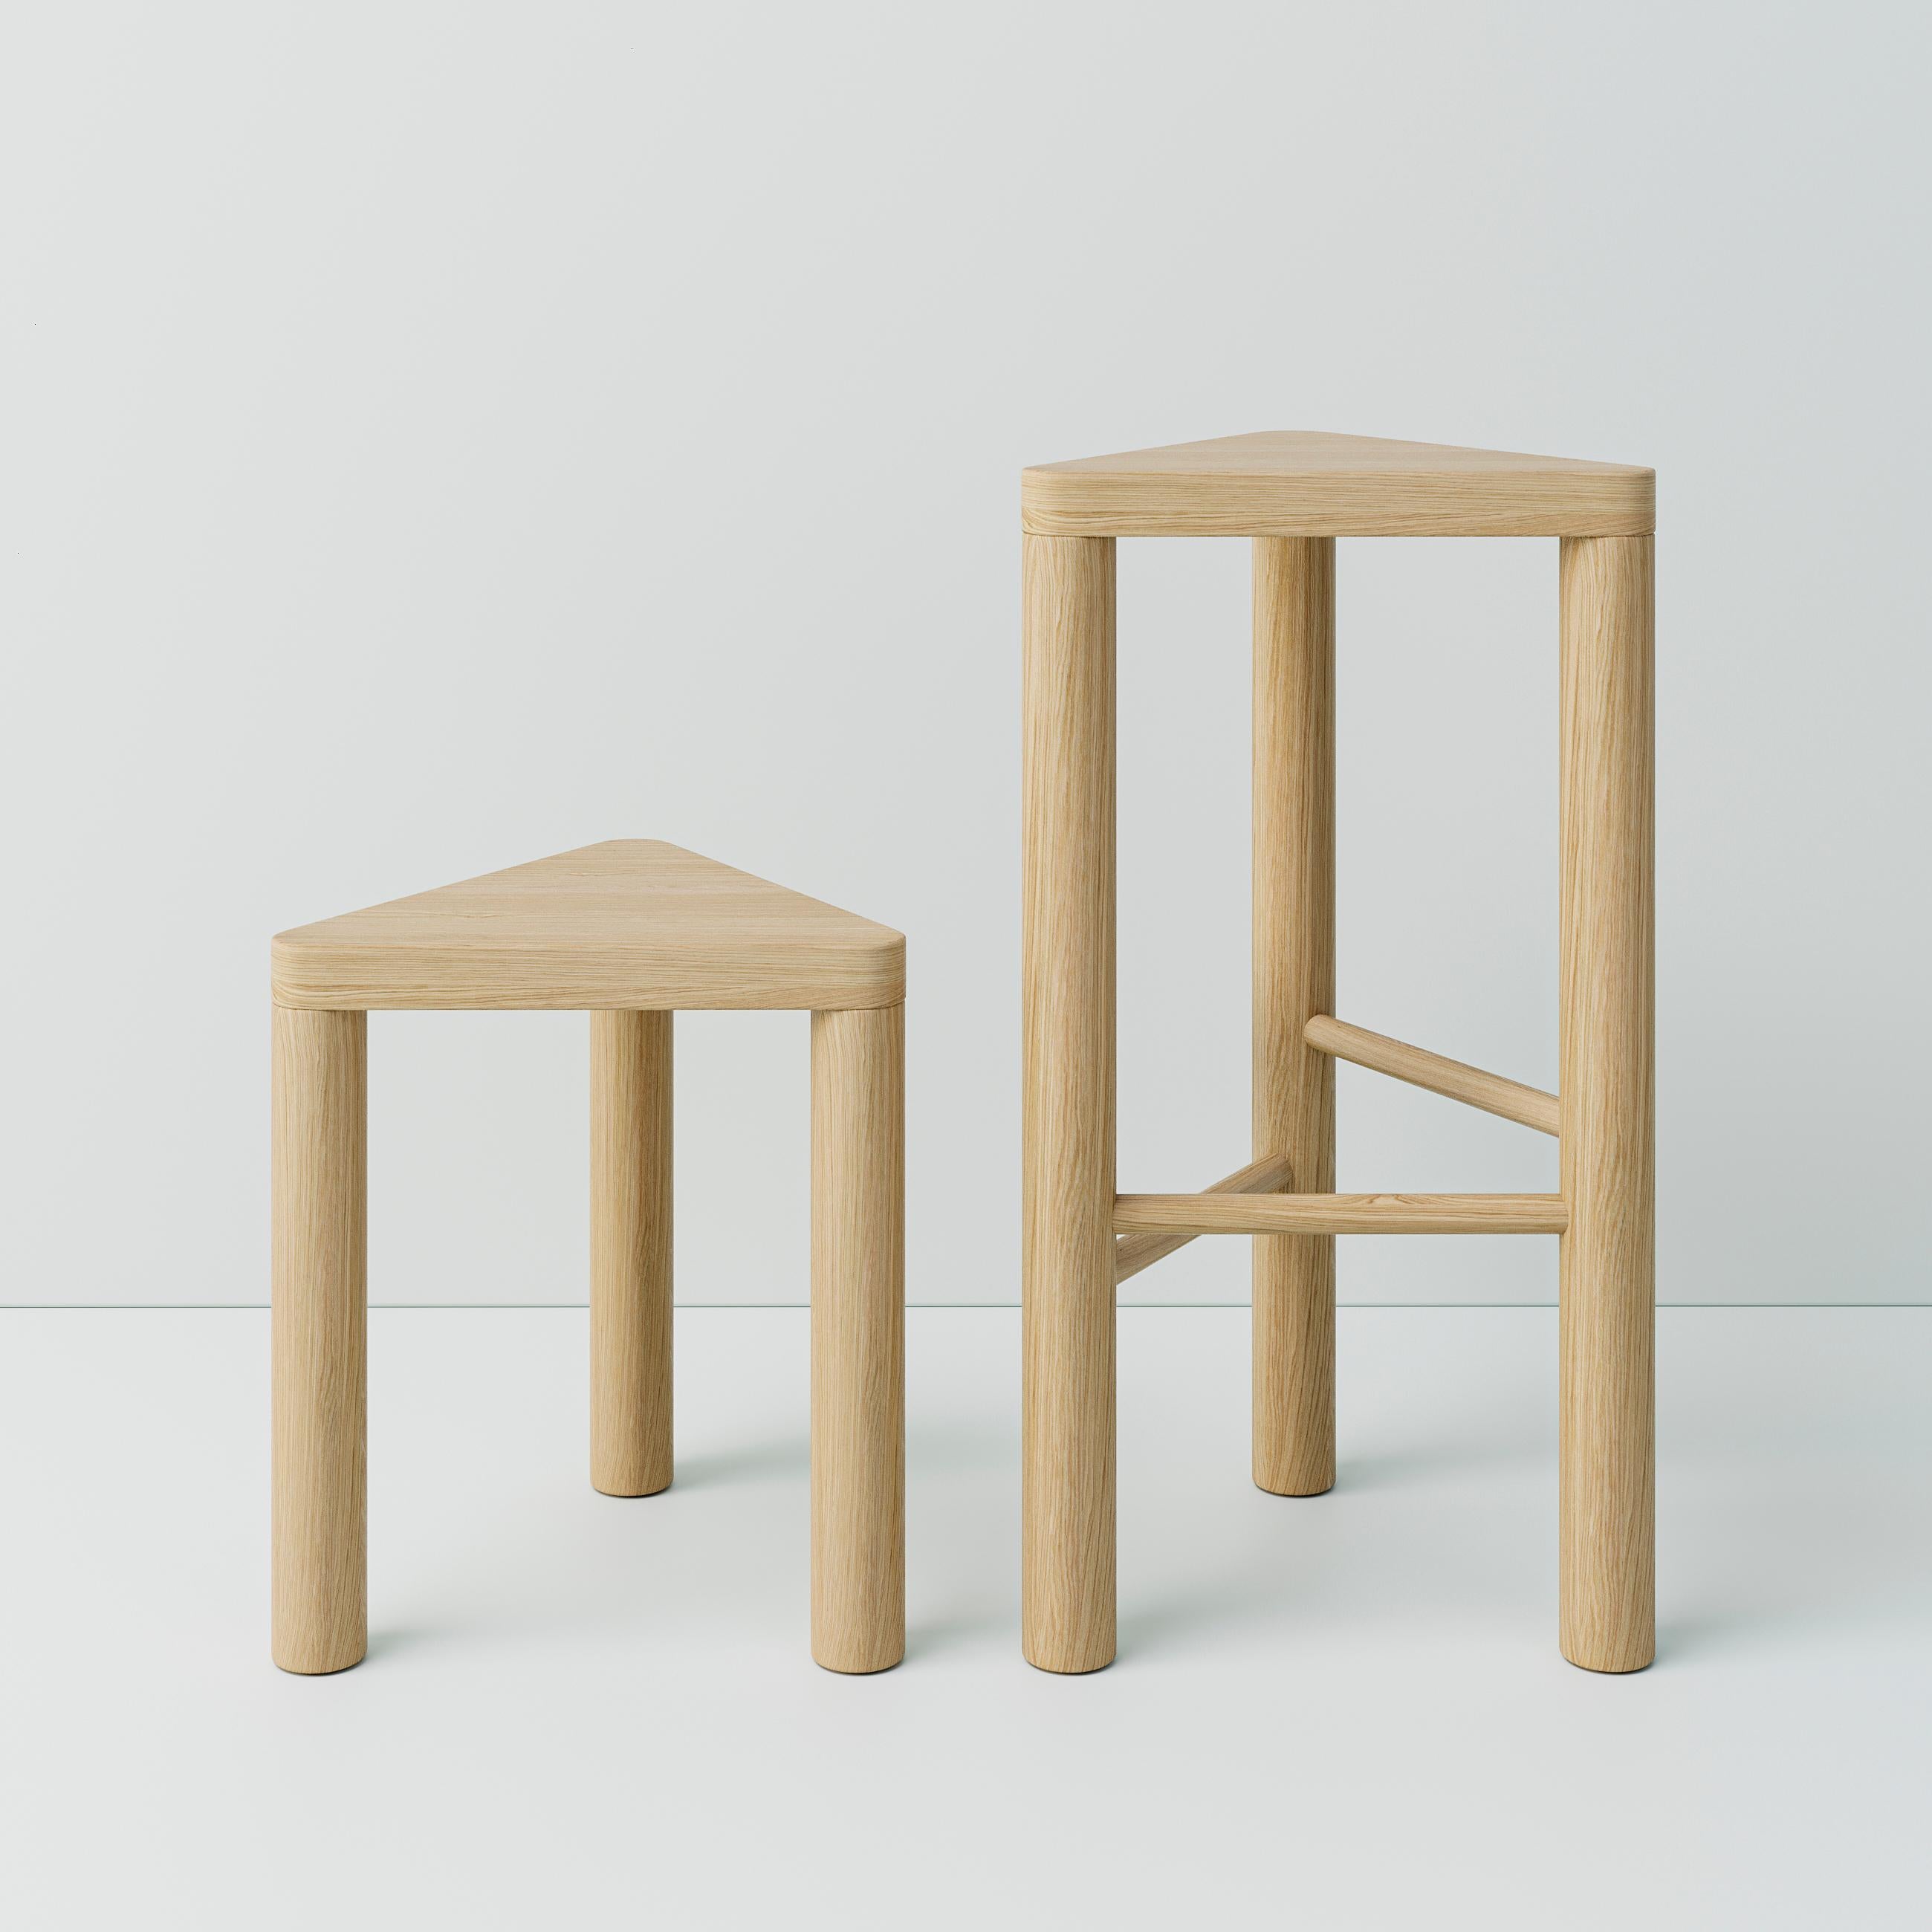 Ash Contemporary Wooden Stool 'Anyday' by Oitoproducts, Natural